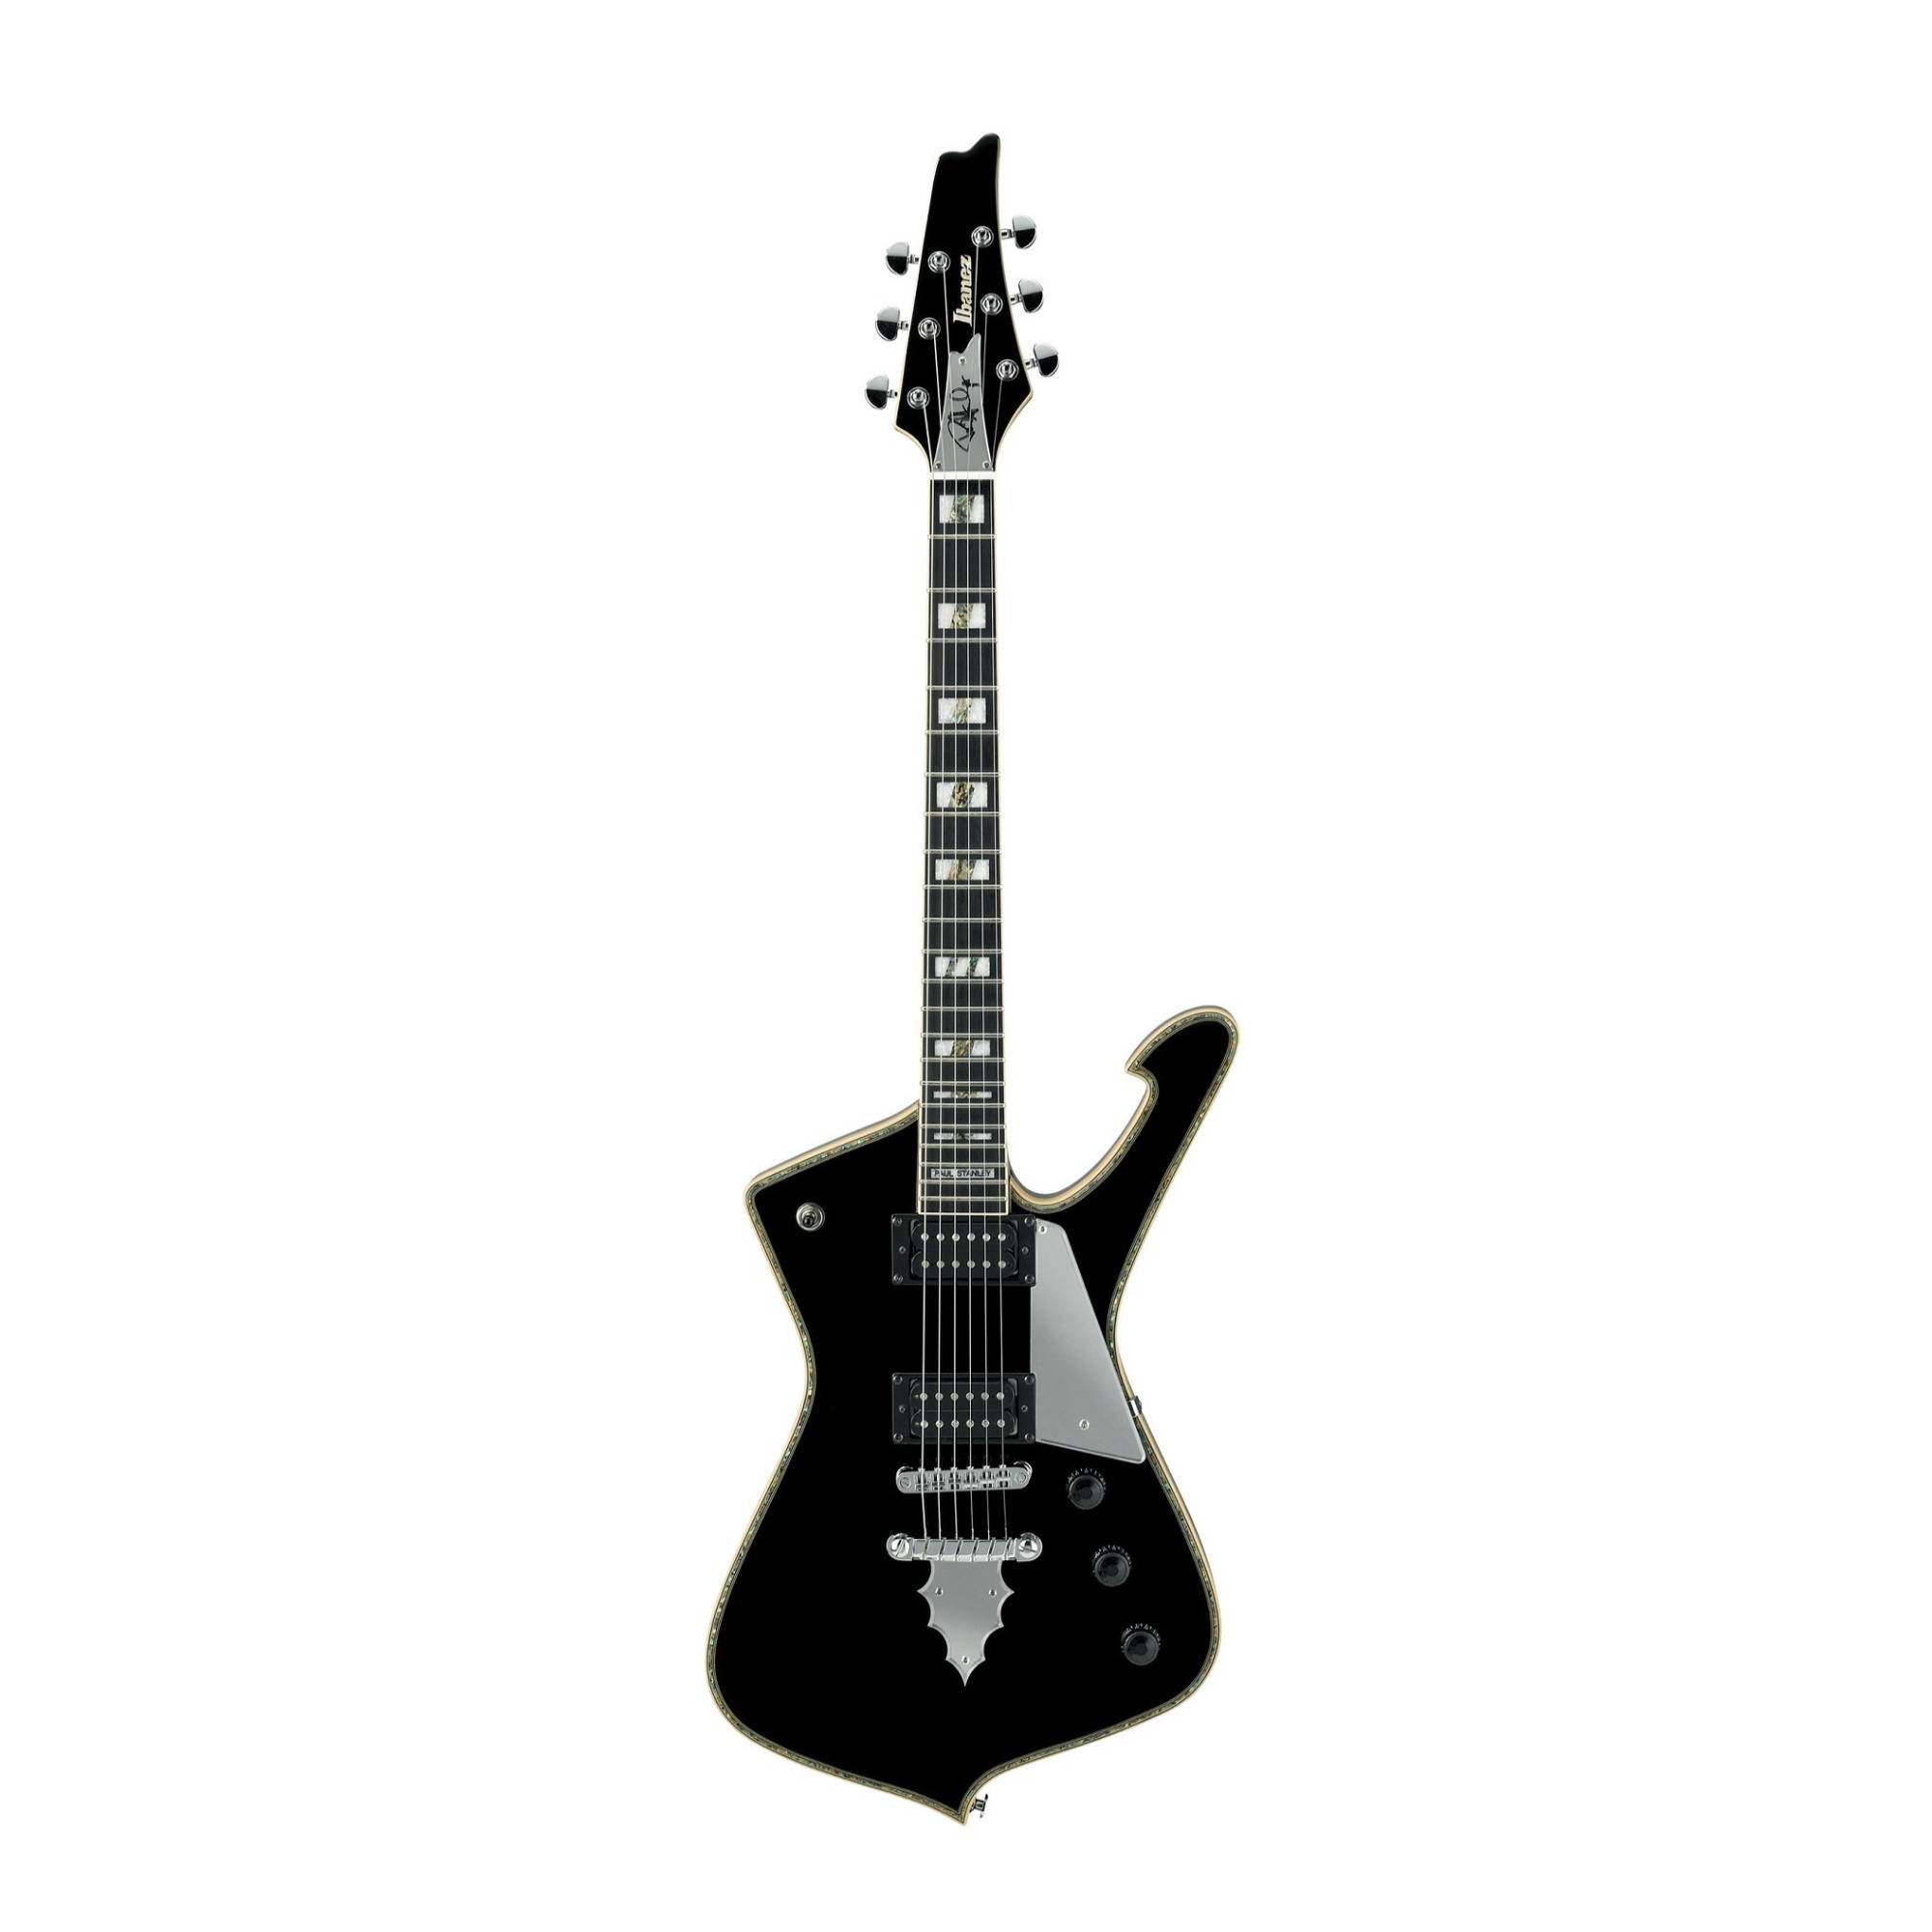 Ibanez Paul Stanley Signature 6-String Electric Guitar (Right-Handed, Black)